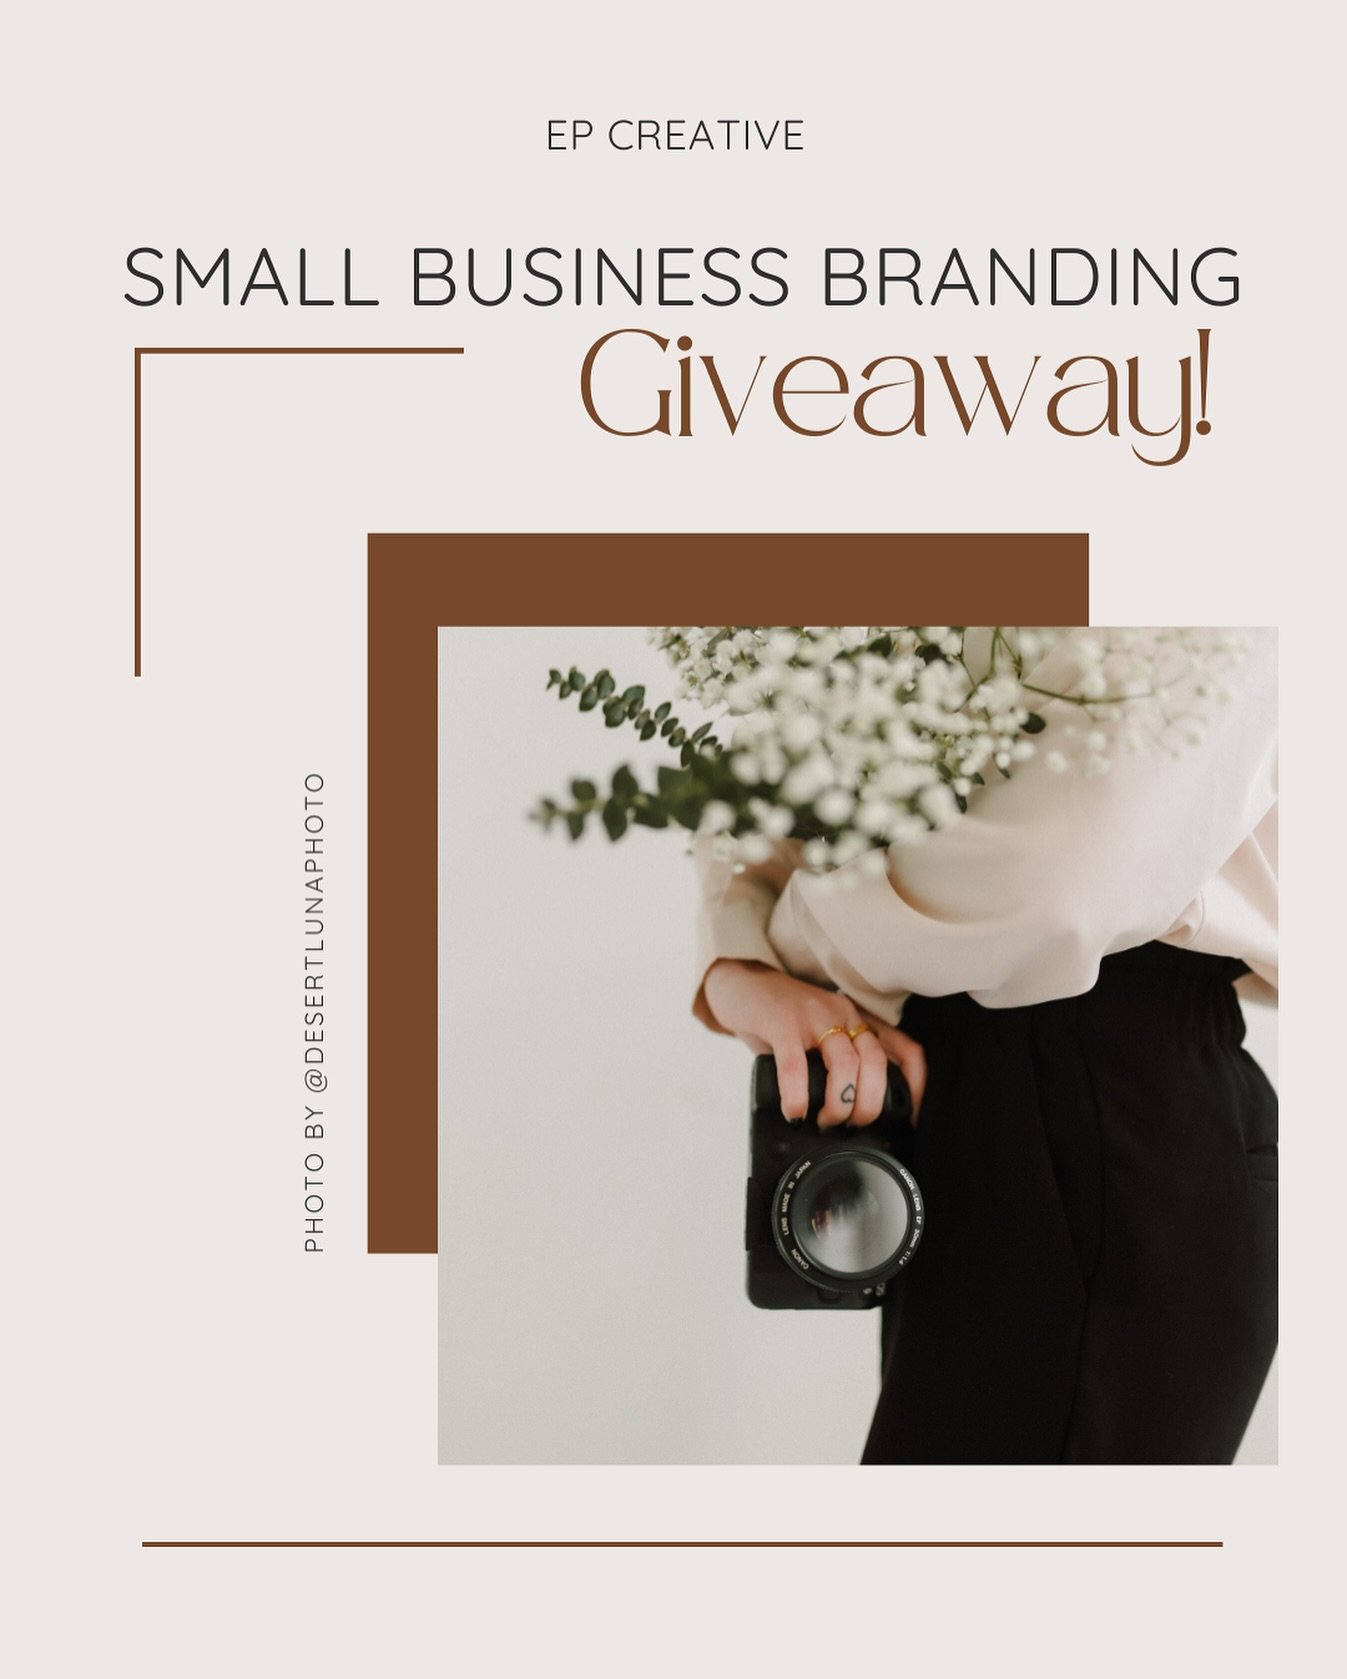 GIVEAWAY! One of my goals for 2024 is to work with more brands, and create monthly marketing content for them. I&rsquo;m choosing a winner to jumpstart this, and to use for some promotional content. 

TO ENTER:
-Follow me @ep.creative 
-Share this to